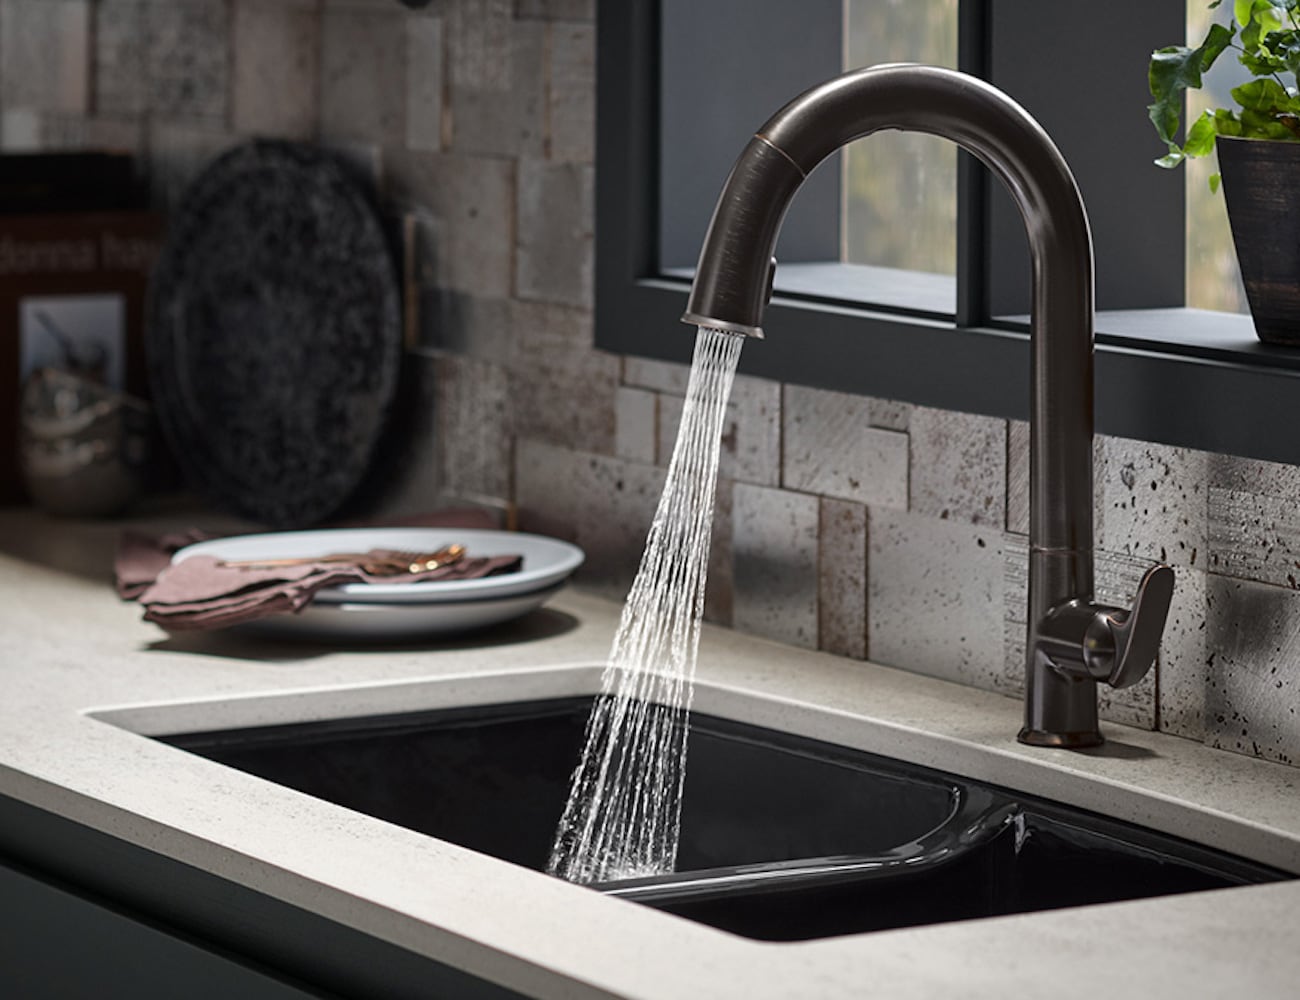 This Smart Kitchen Sink Faucet Will Help You Cook